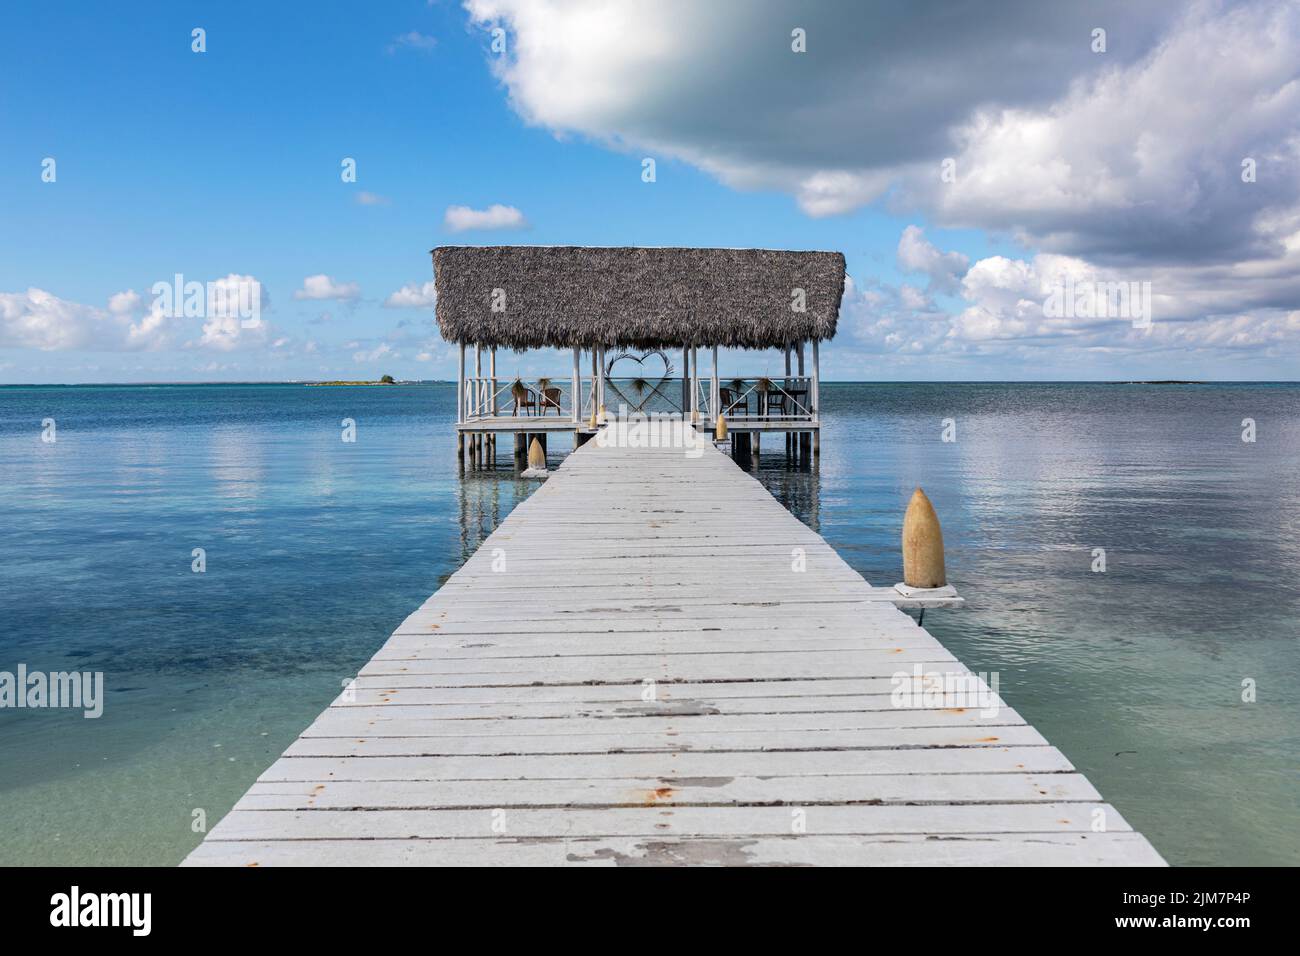 A wooden pier at a holiday resort in the Caribbean, Cuba. Stock Photo